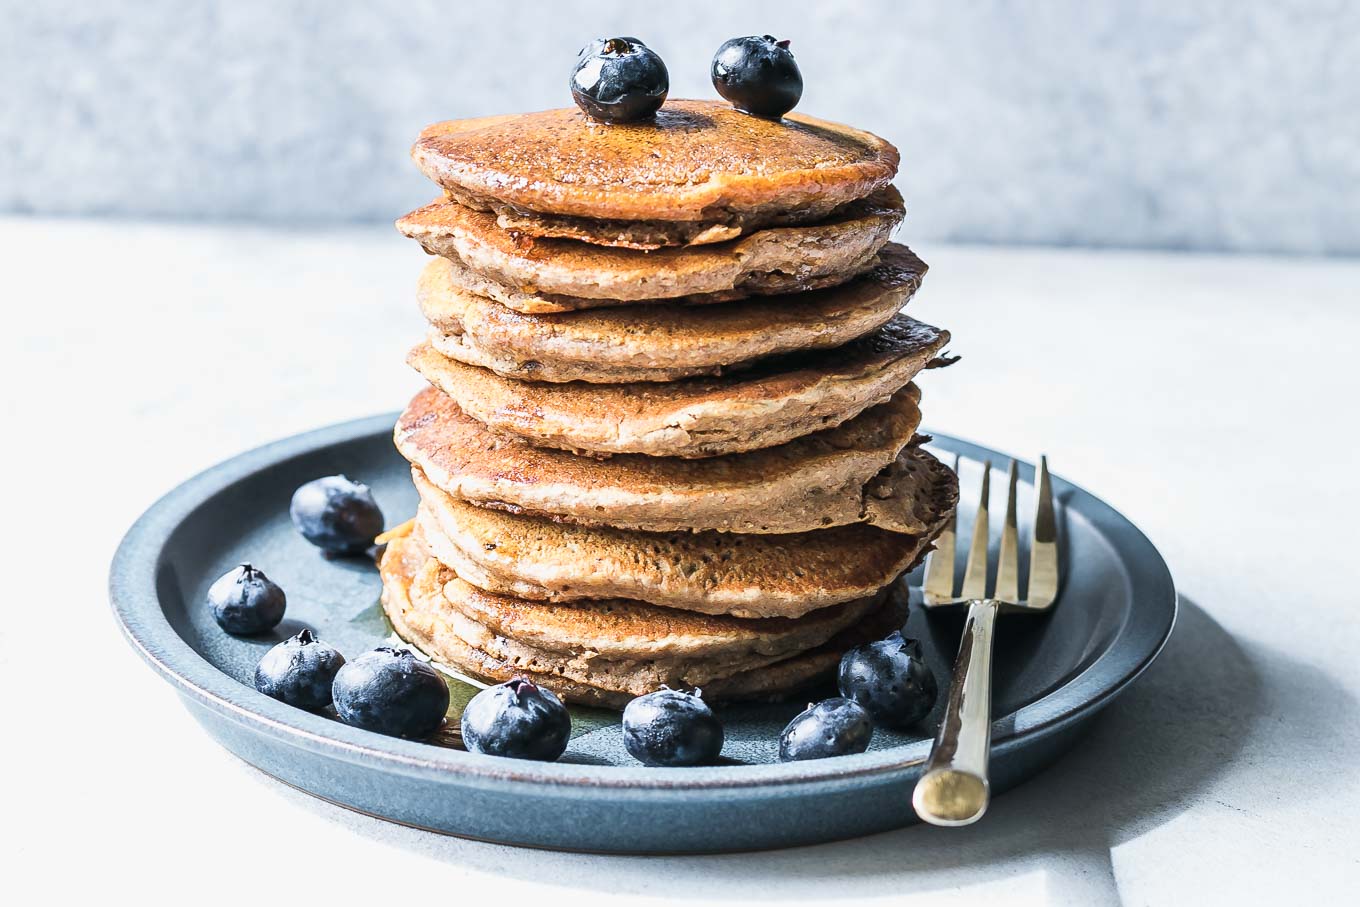 a stack of whole wheat pancakes on a blue plate with maple syrup and blueberries